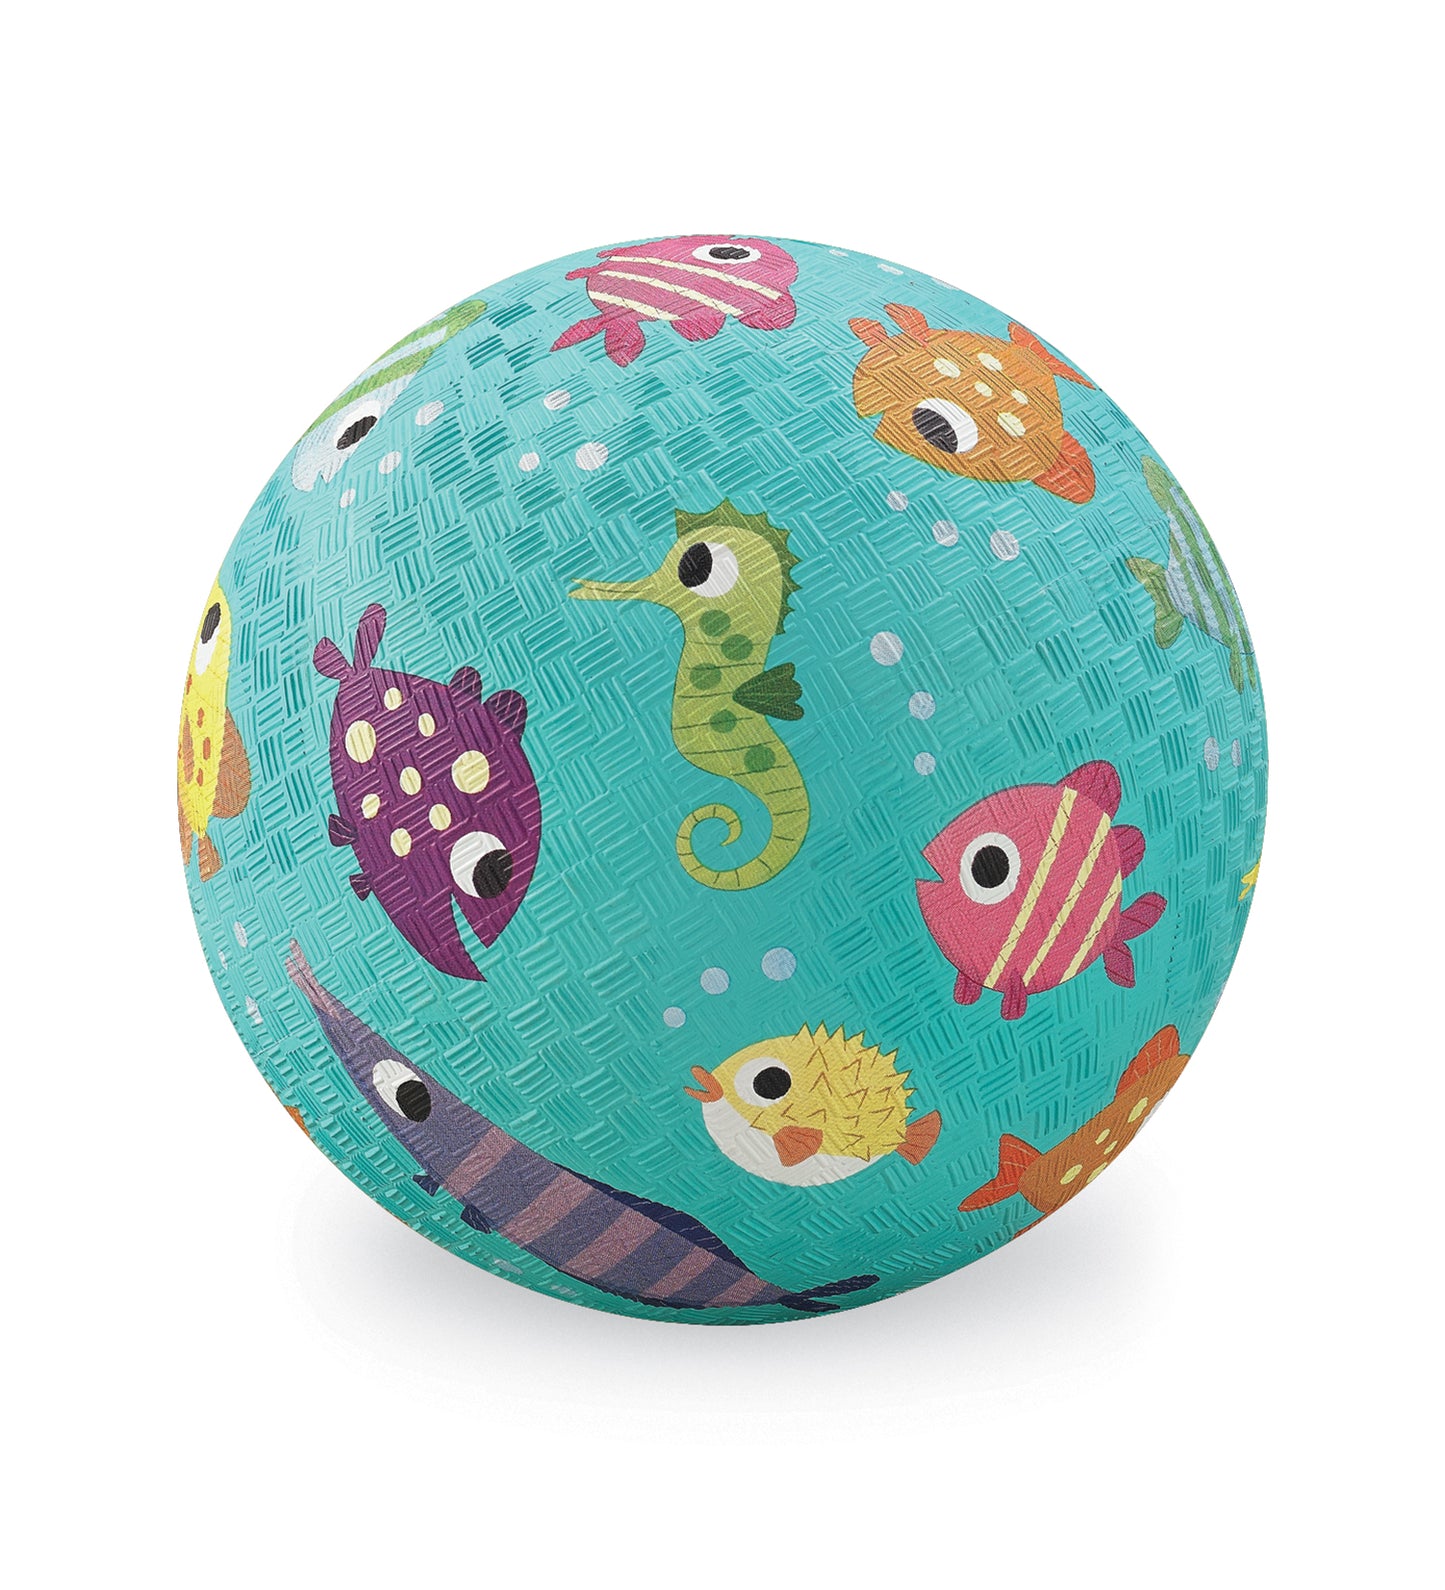 5" Playground Ball - Many Pattern Choices